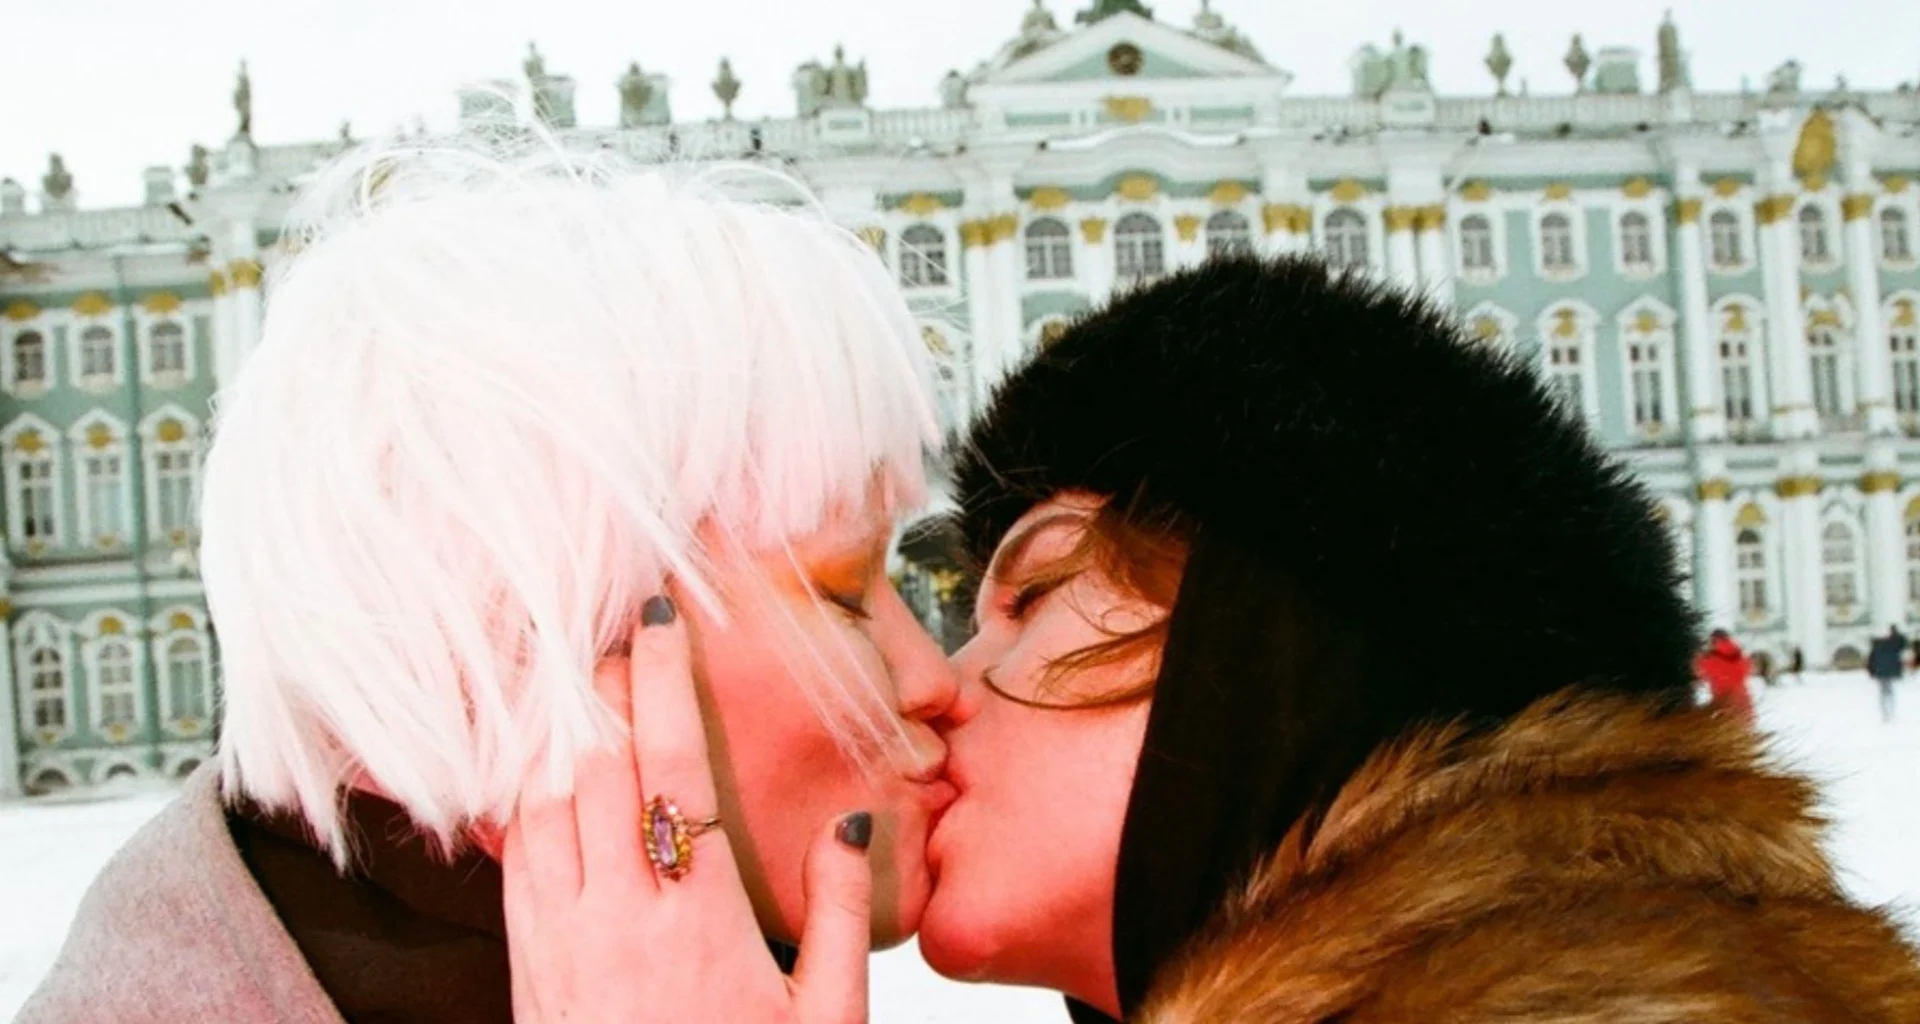 Love yourself: the Russian photo project speaking candidly about queer self-love 